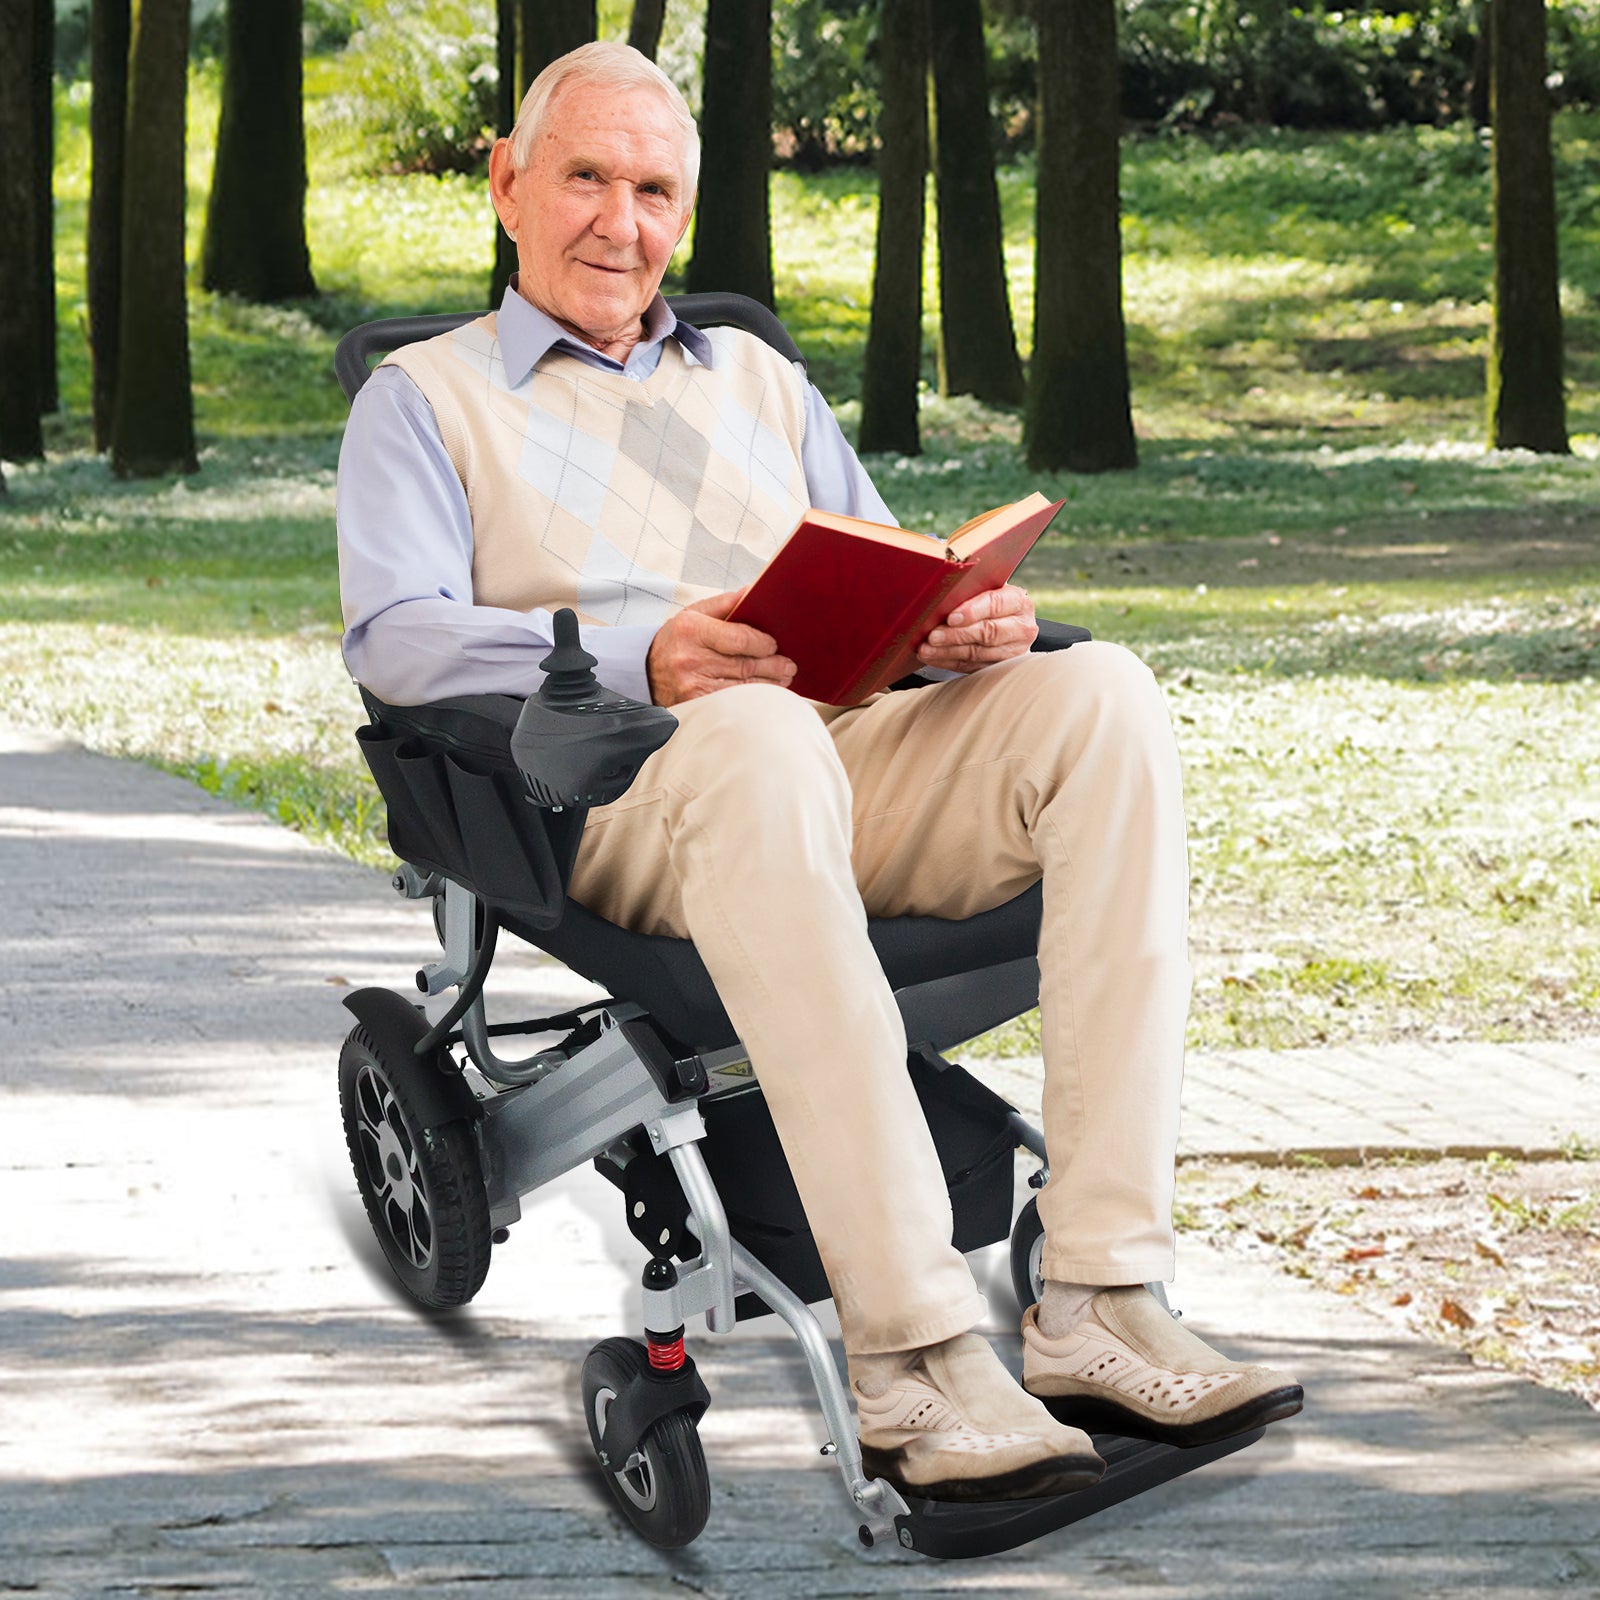 Power Wheelchair for Seniors and Disabled, Light-weight and Foldable,Suitable for All Terrain